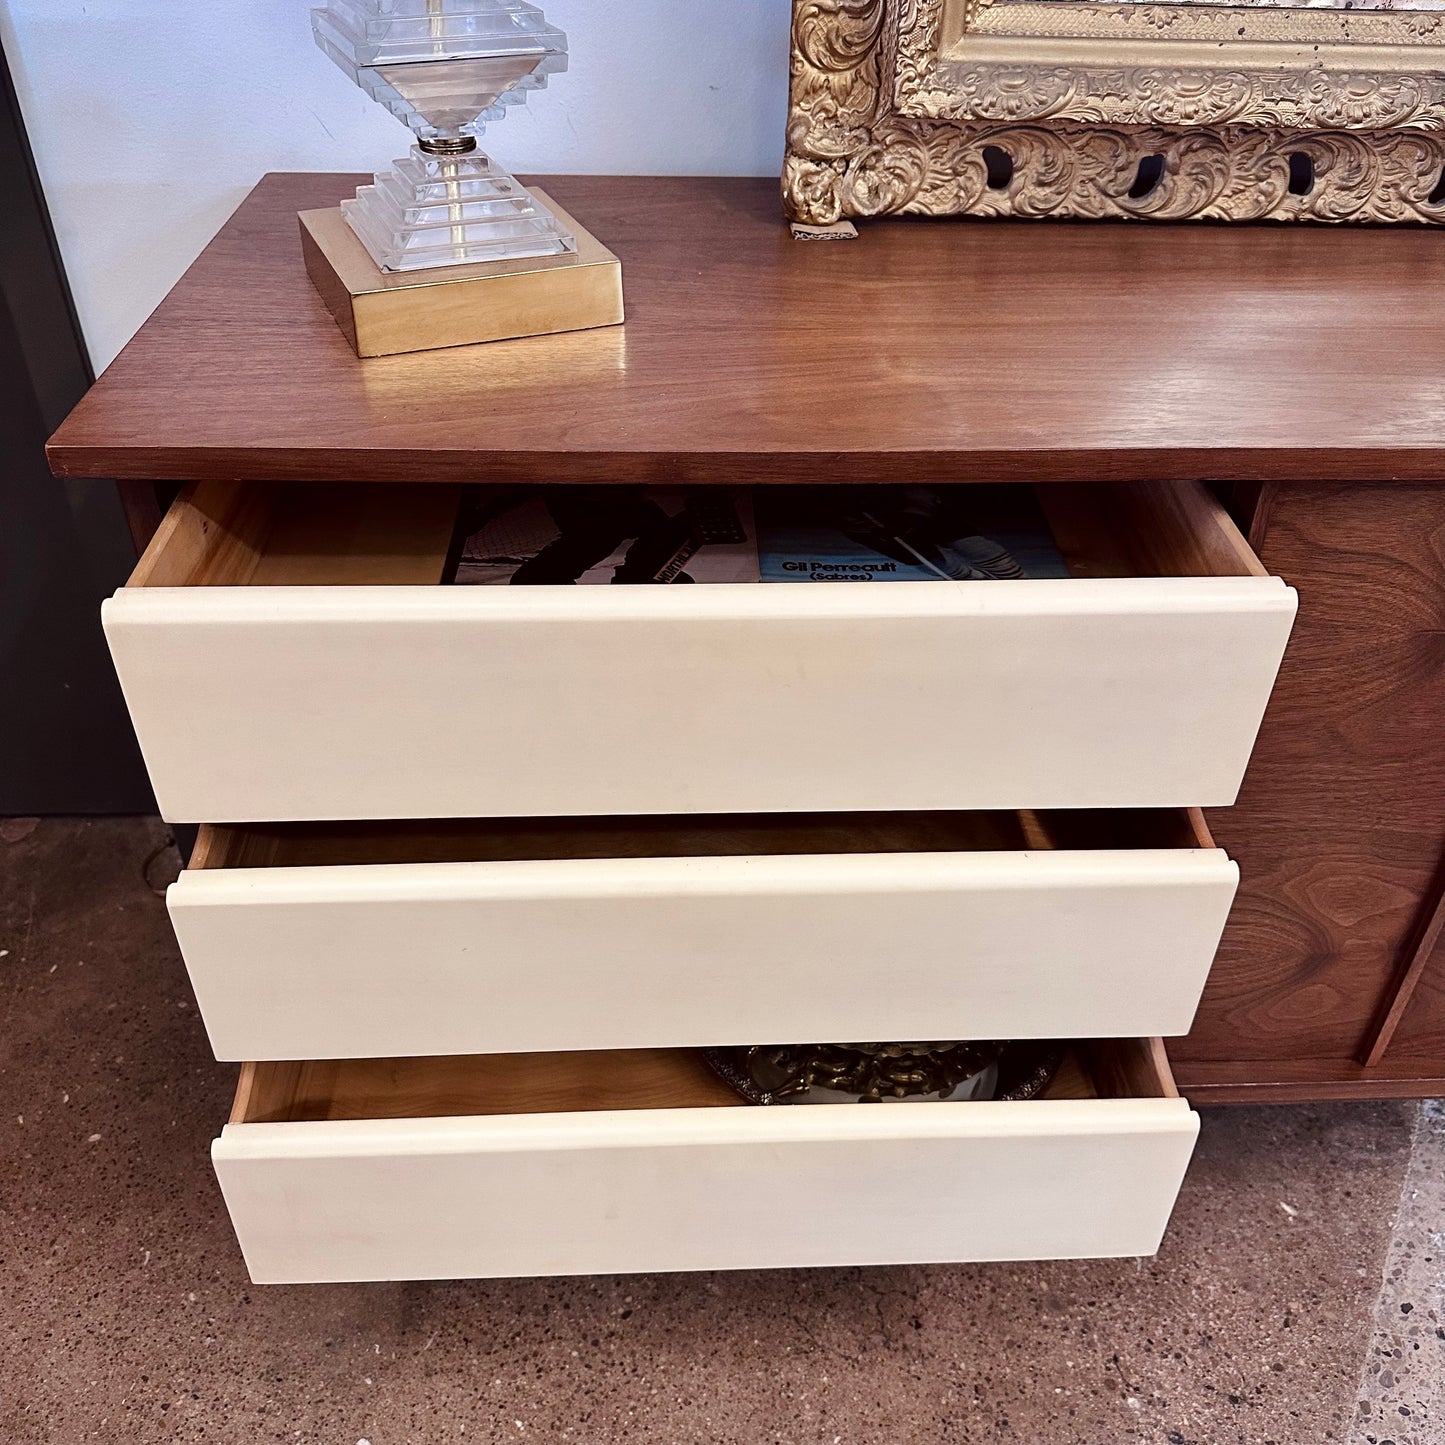 WALNUT BYPASS DOOR CREDENZA WITH DRAWERS